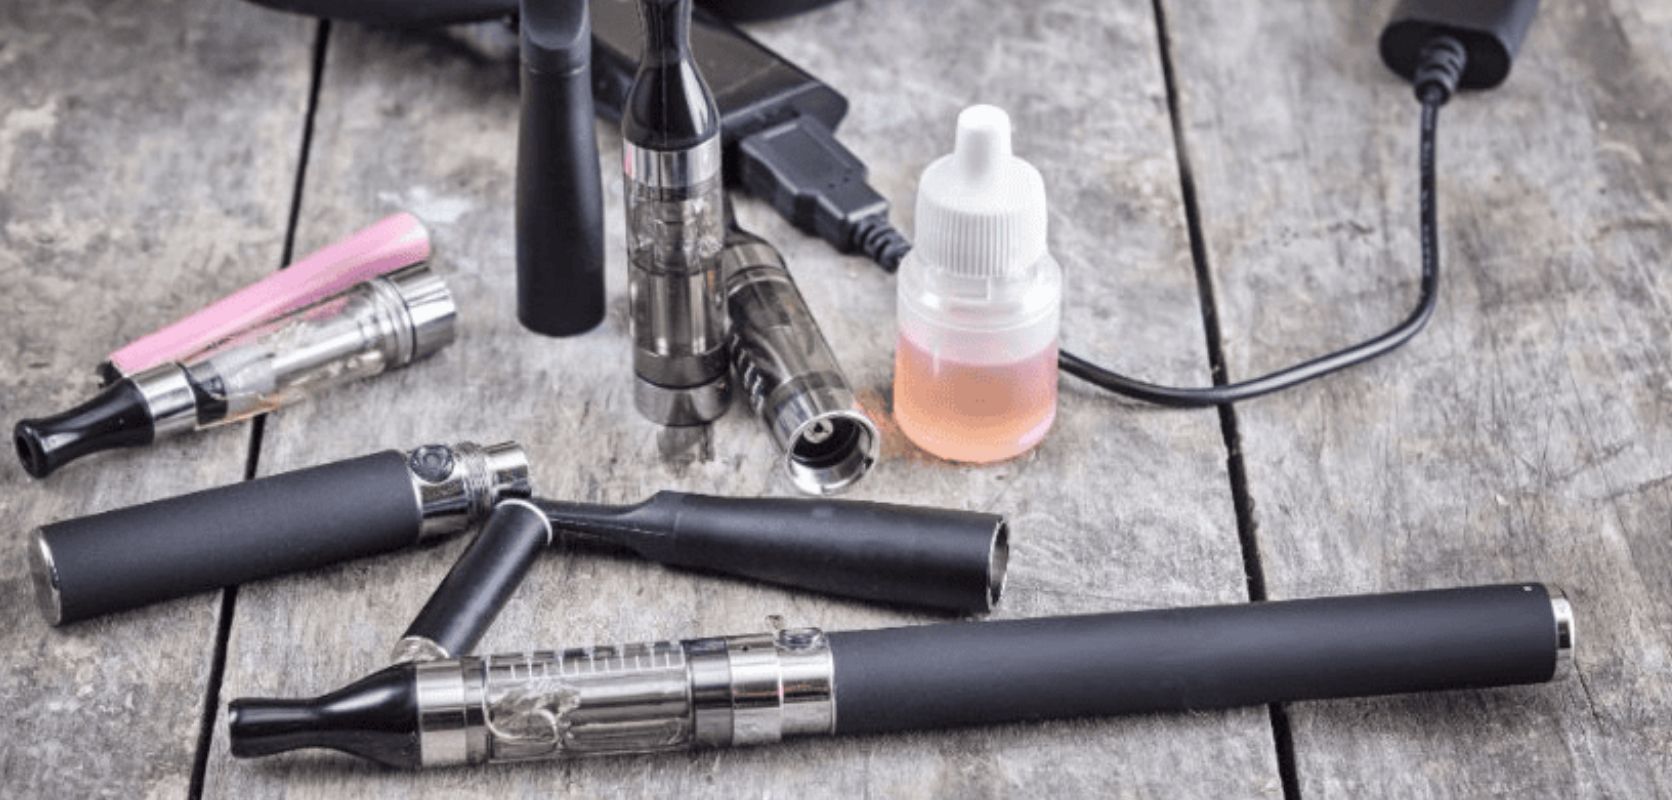 If you love BC cannabis, you've undoubtedly heard the term "510 vape battery" at least once. 